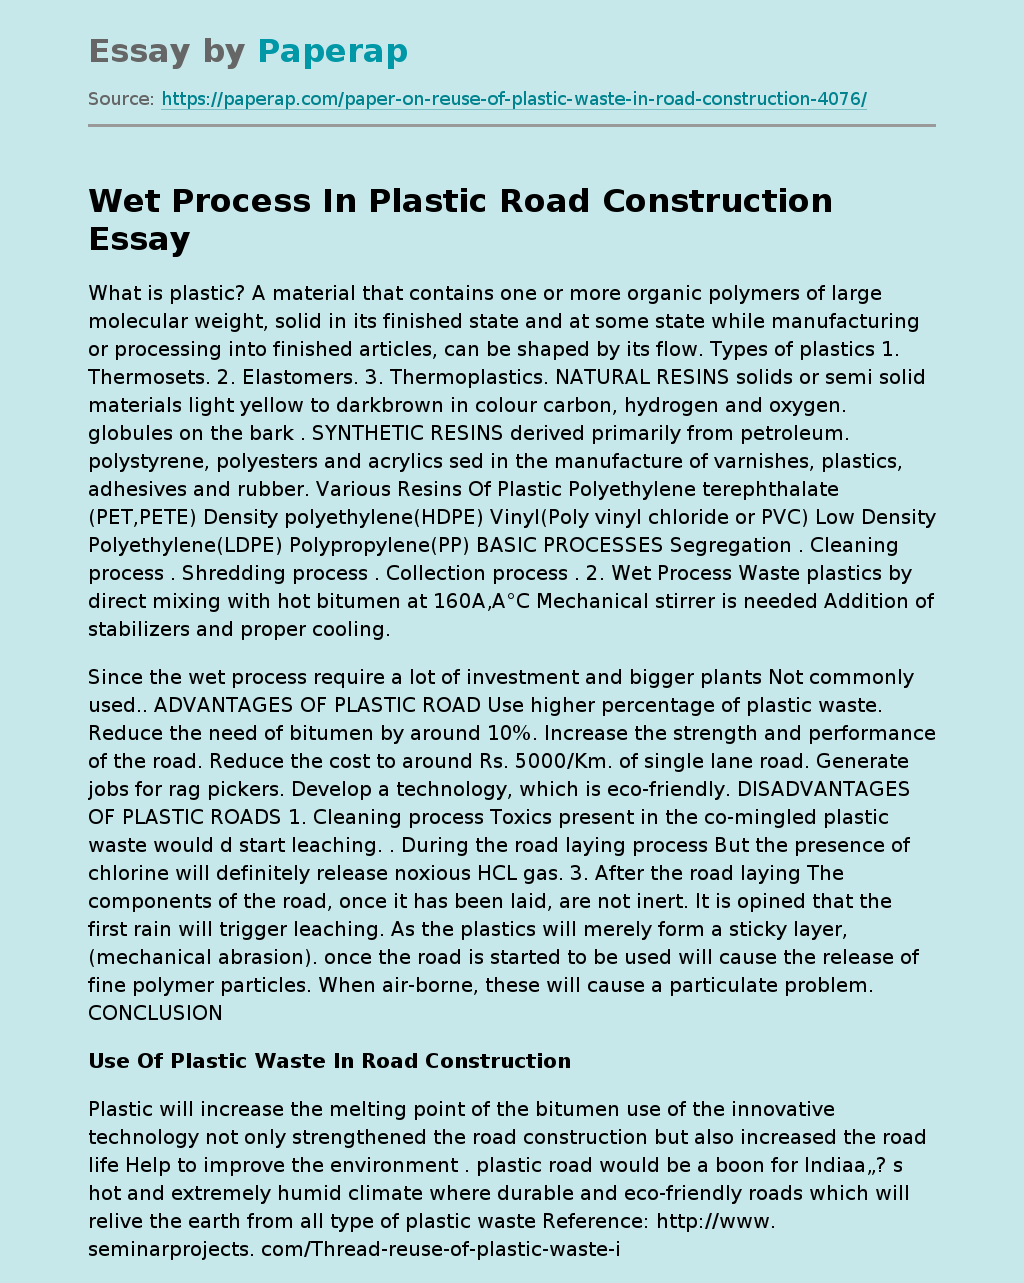 Wet Process In Plastic Road Construction